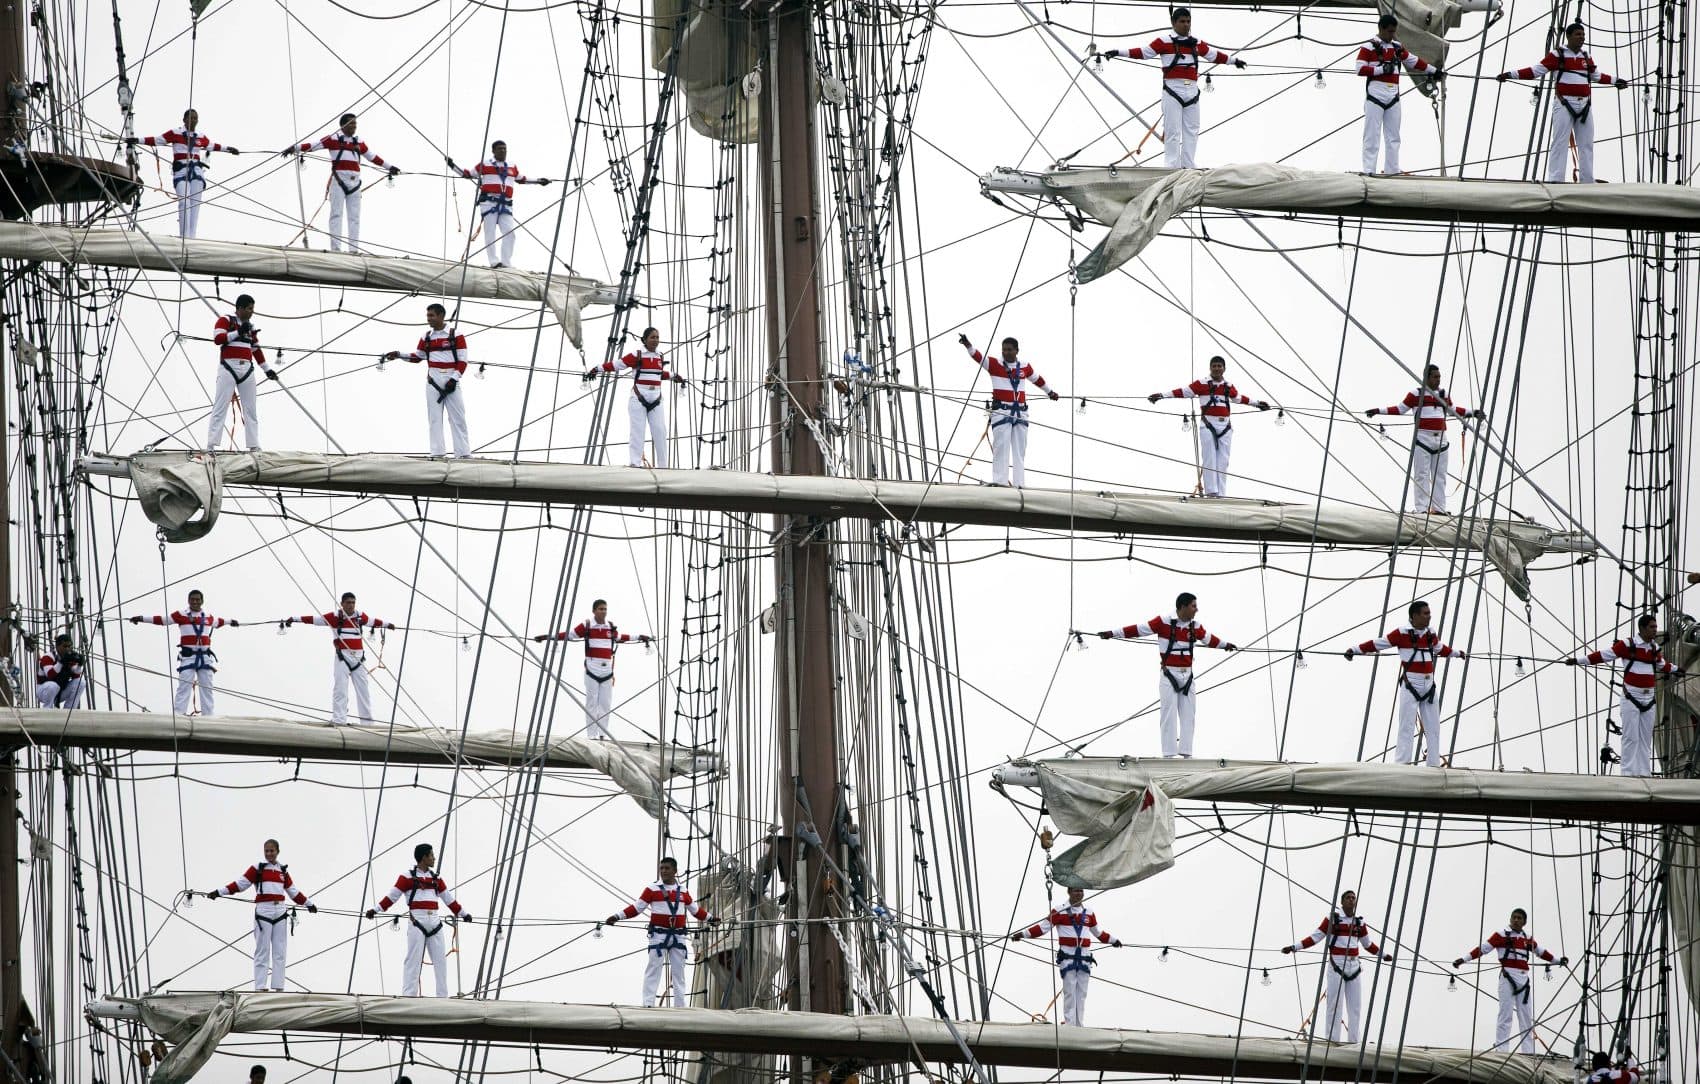 Sailors man the rigging on the Peruvian Navy tall ship Union during Sail Boston's Parade of Sail on Saturday. (Michael Dwyer/AP)